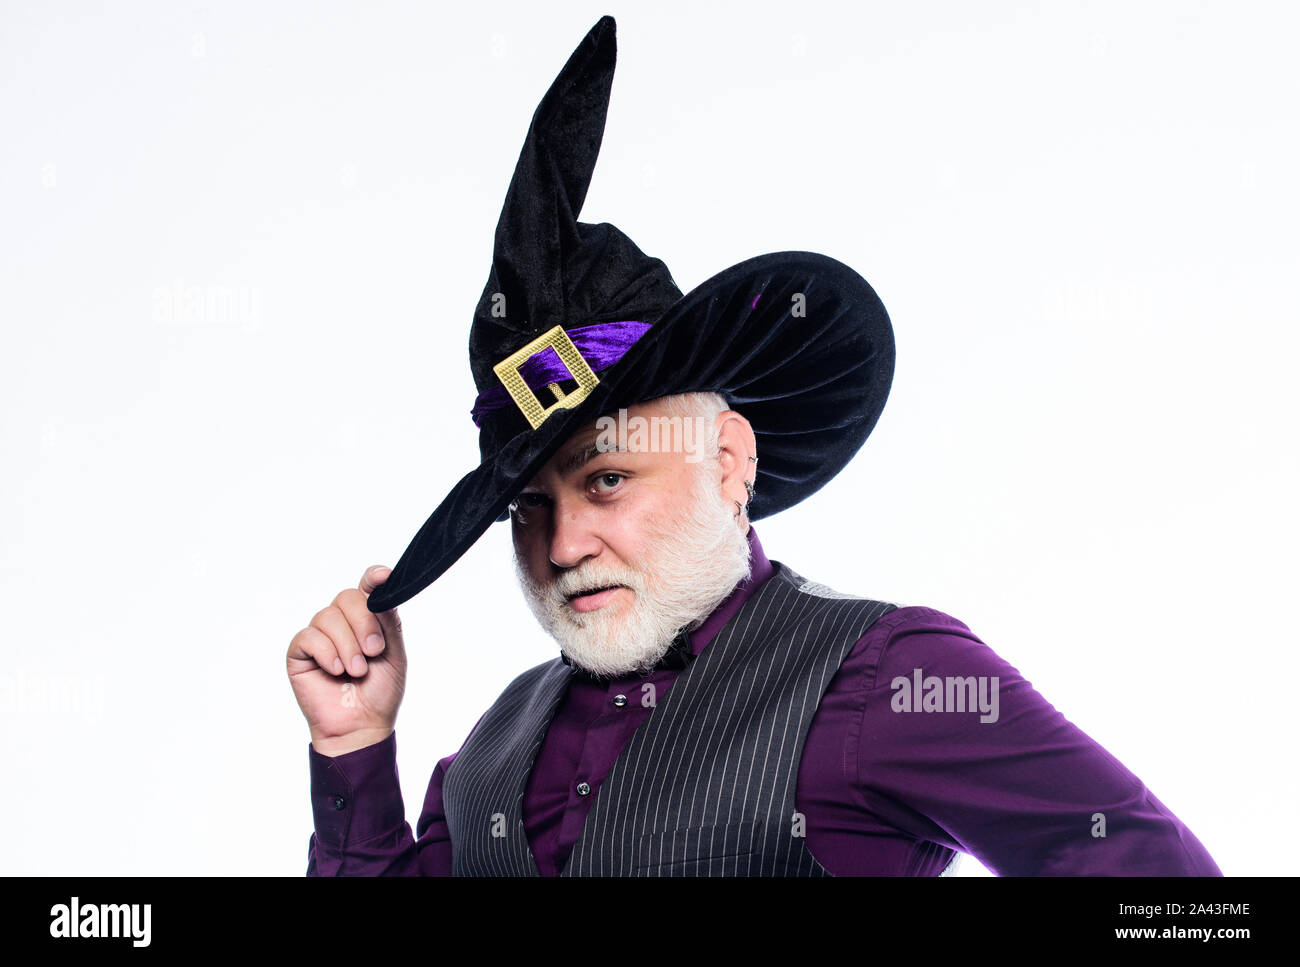 Wizard Costume Hat Halloween Party Senior Man White Beard Celebrate Halloween Magician Witcher Old Man Magic Concept Experienced And Wise Magic Spell Halloween Tradition Cosplay Outfit Stock Photo Alamy